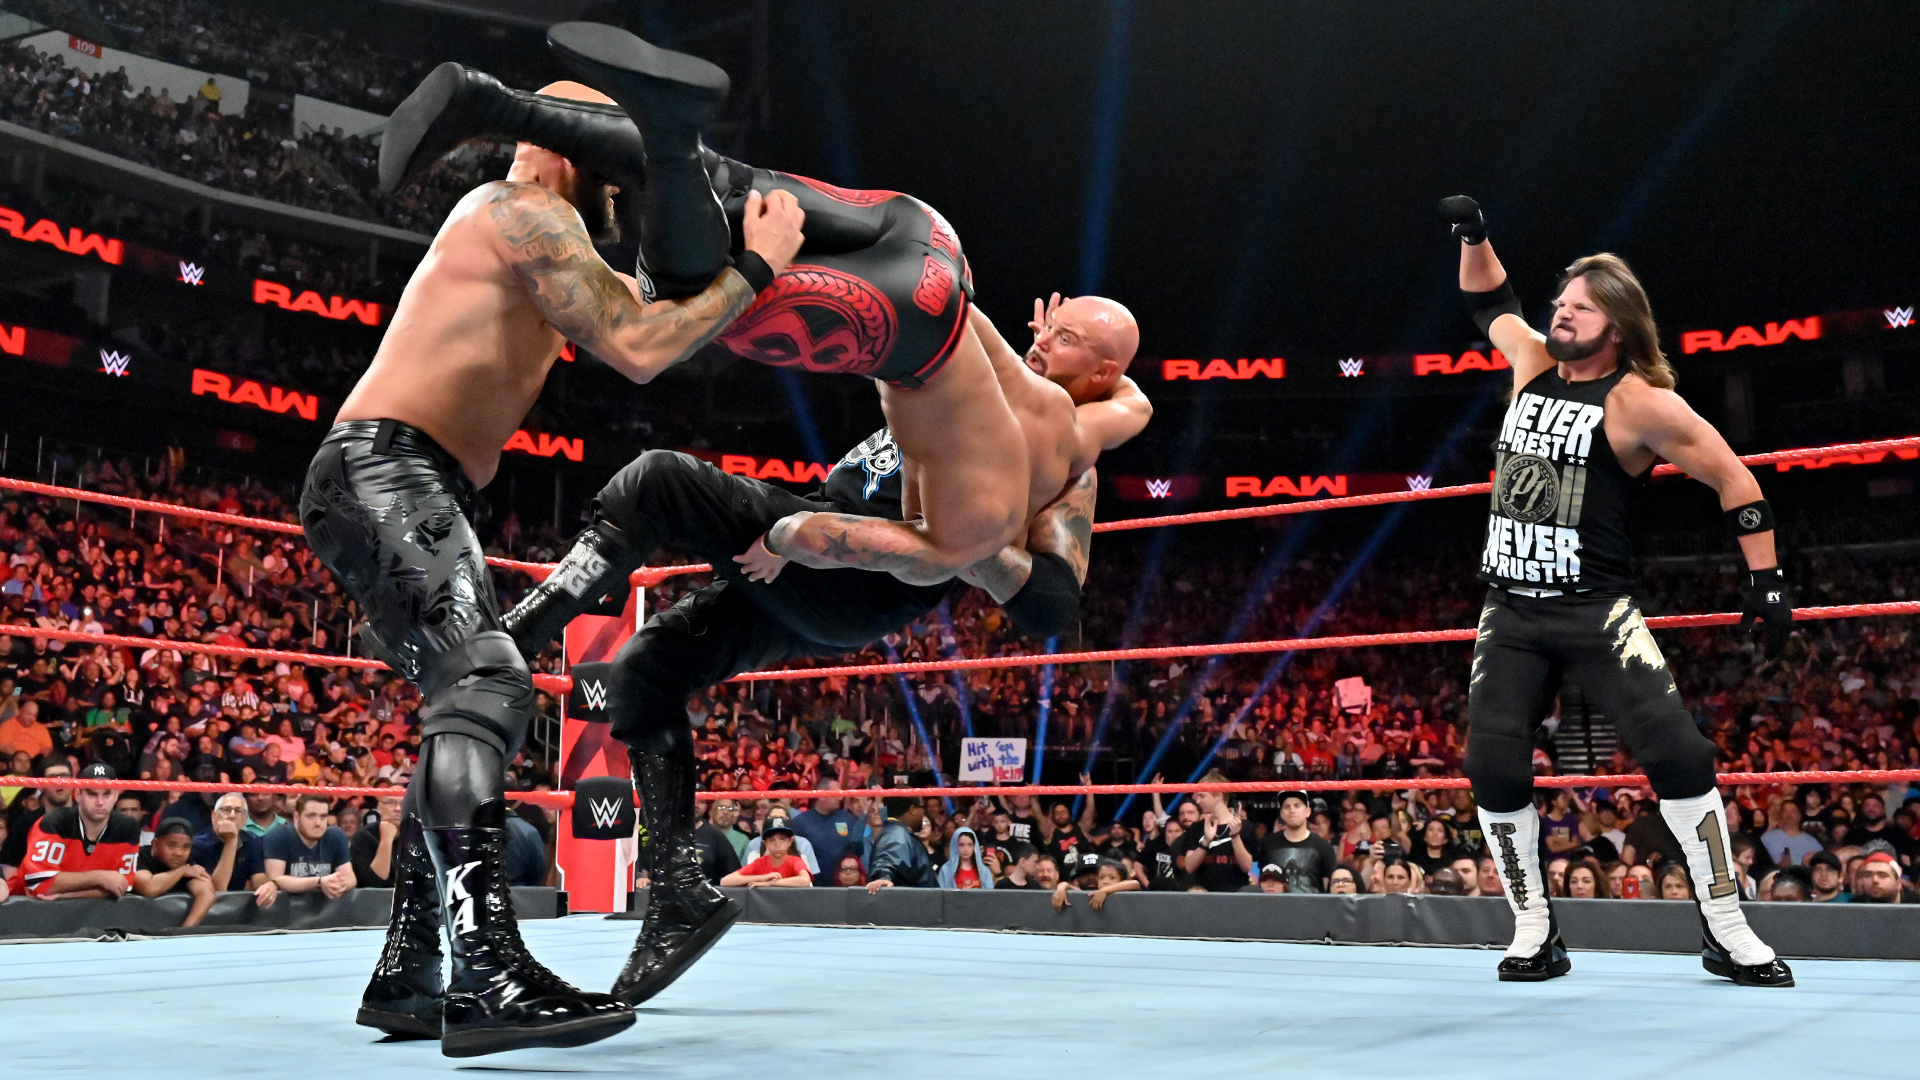 United States Champion Ricochet def. Luke Gallows and Karl Anderson